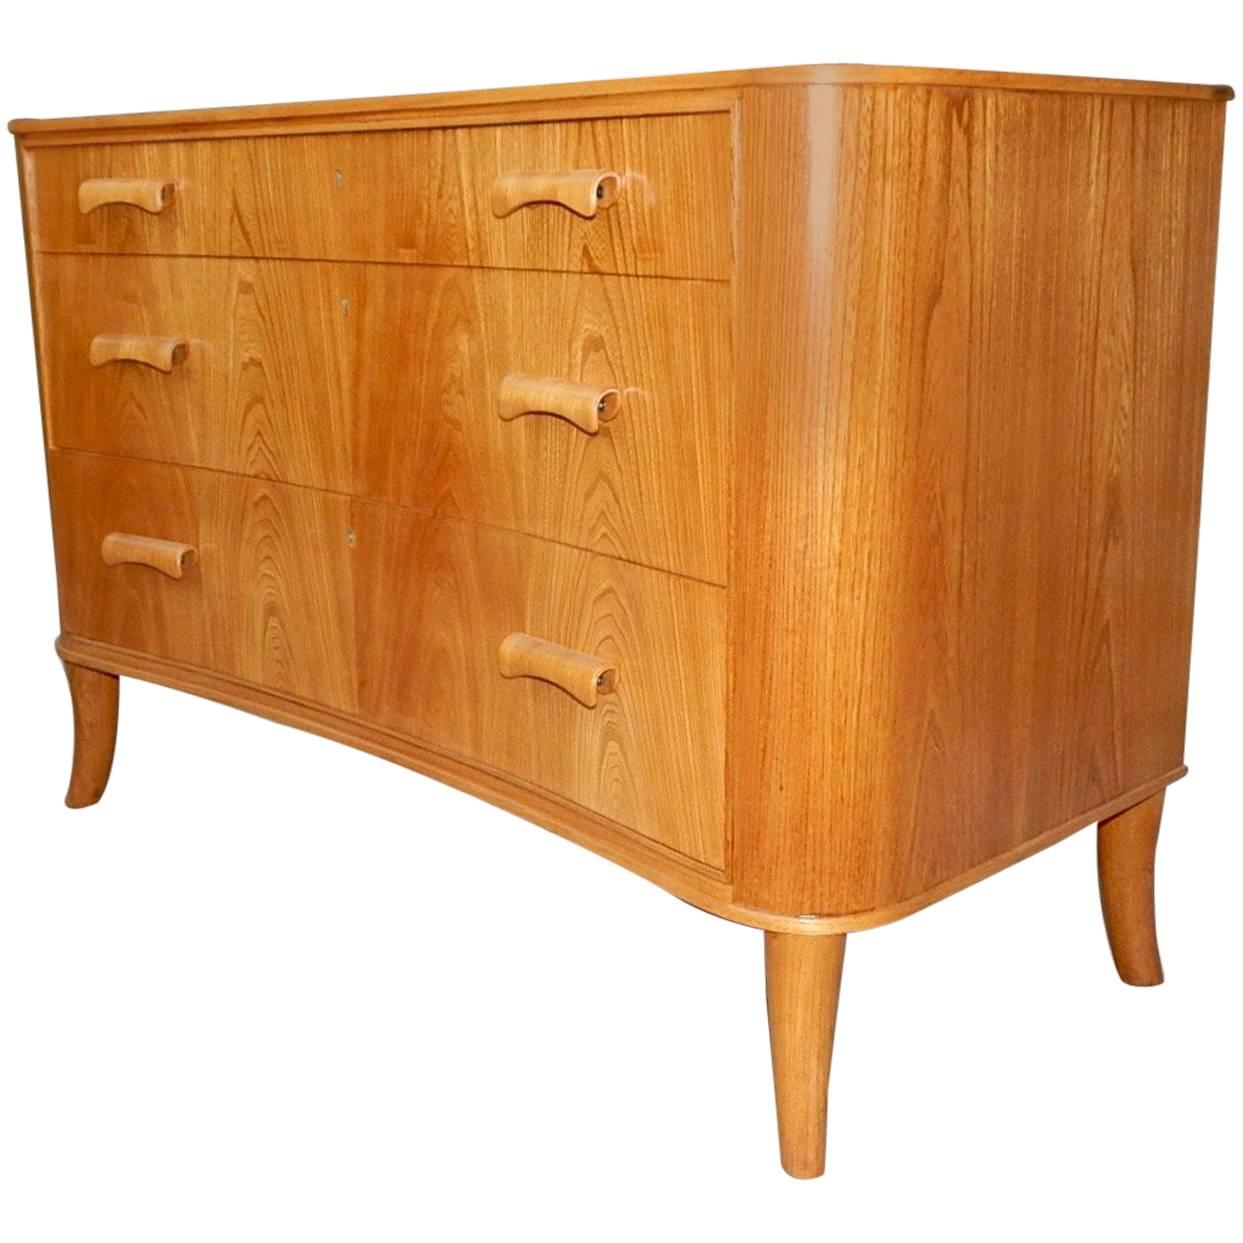 Swedish art moderne era chest of drawers rendered in birch and bookmatched elm. Designed by Axel Larsson for Bodafors, circa 1940. This piece has been beautifully restored by our woodworkers.